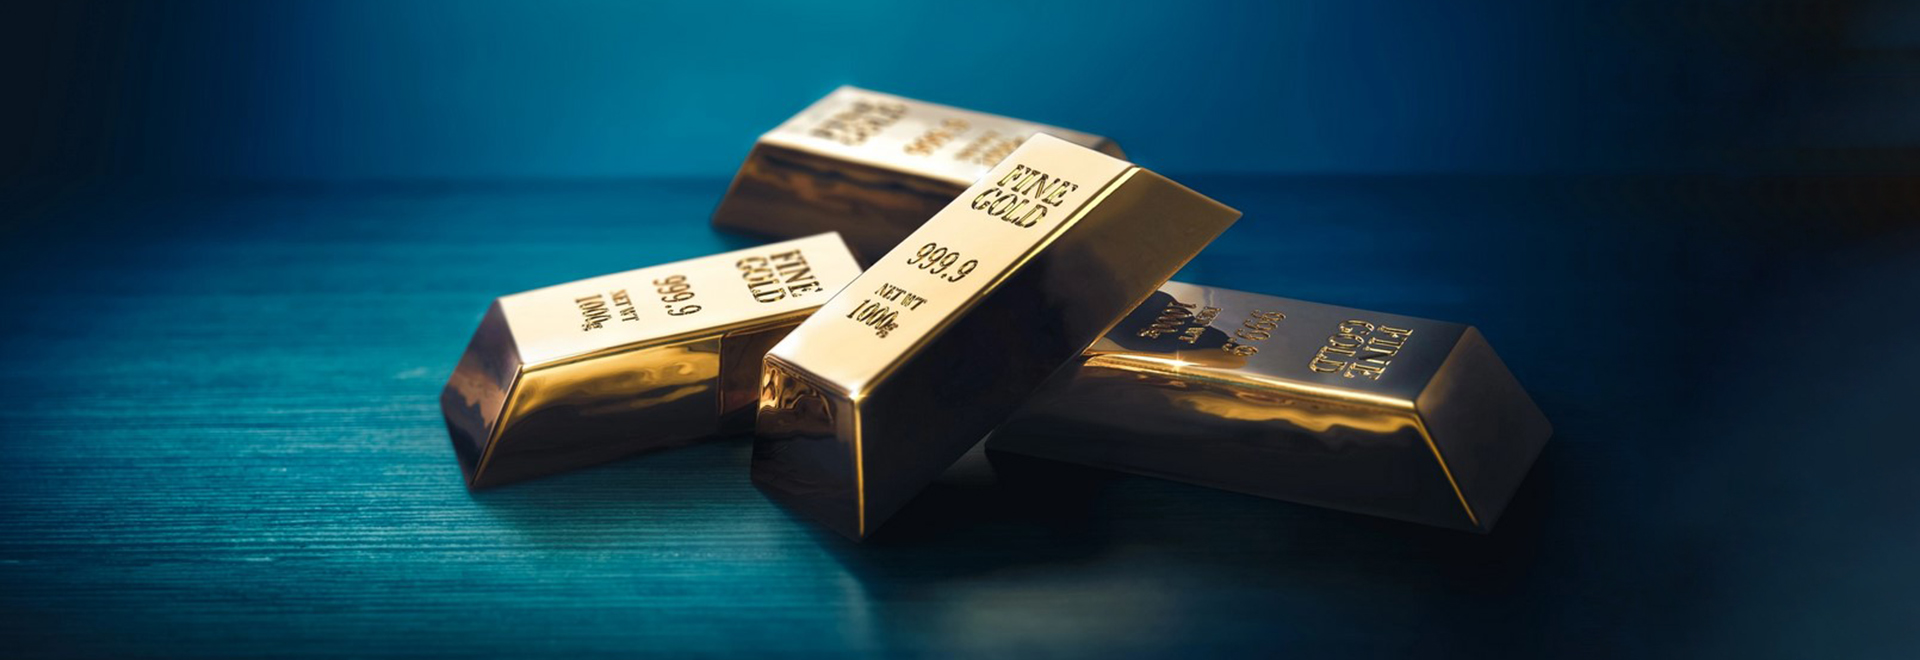 Gold Prices Hold Tight Range Ahead of US Inflation Data